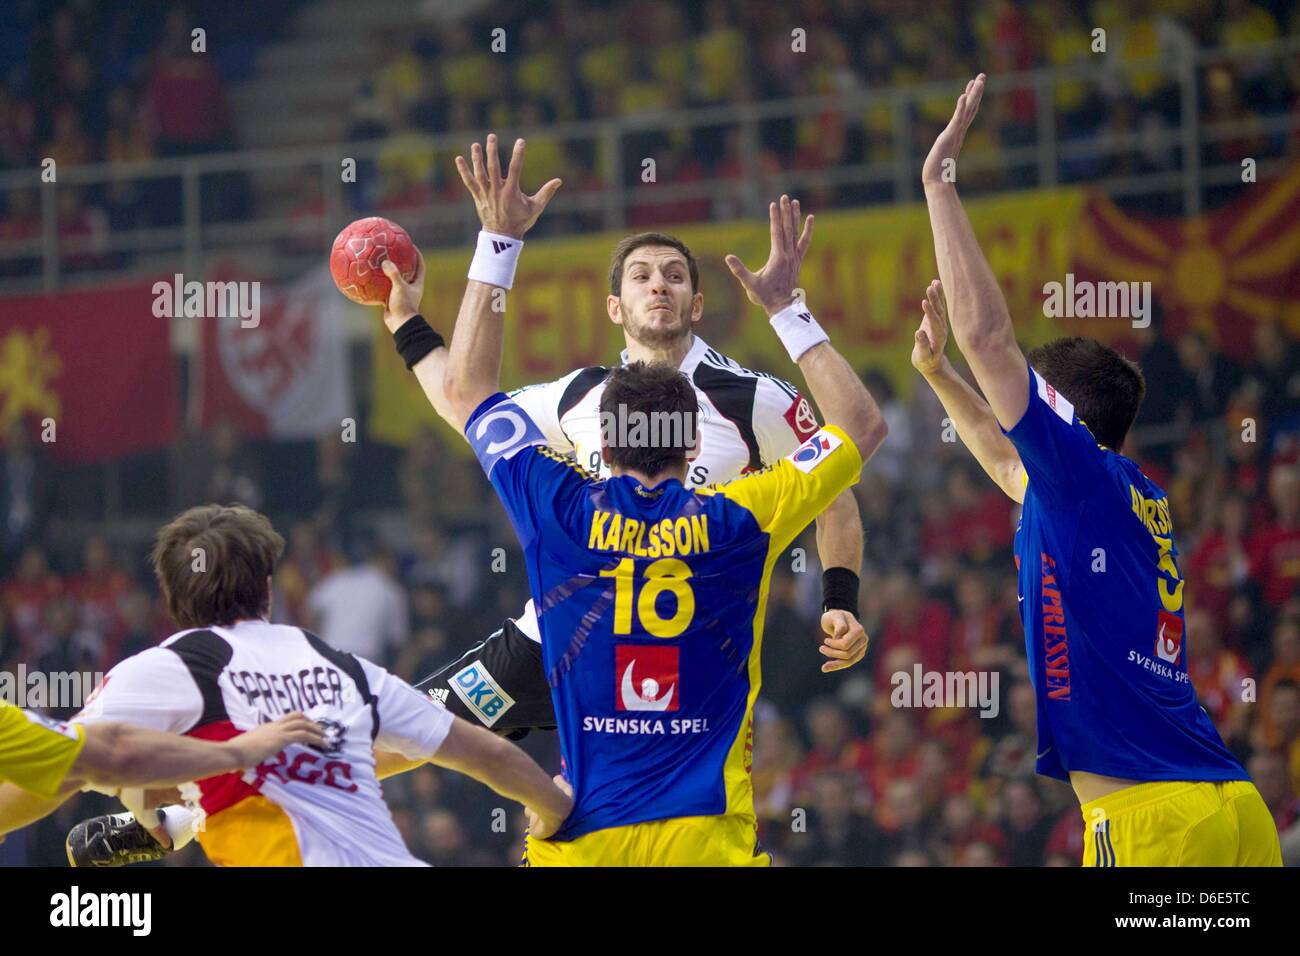 Germany's Michael Haass (C) attempts a jump shot against Sweden's Tobias Karlsson and Kim Andersson (R) during the Handball  European Championship group B match between Germany and Sweden in Nis, Serbia, 19 January 2012. Photo: Jens Wolf Stock Photo